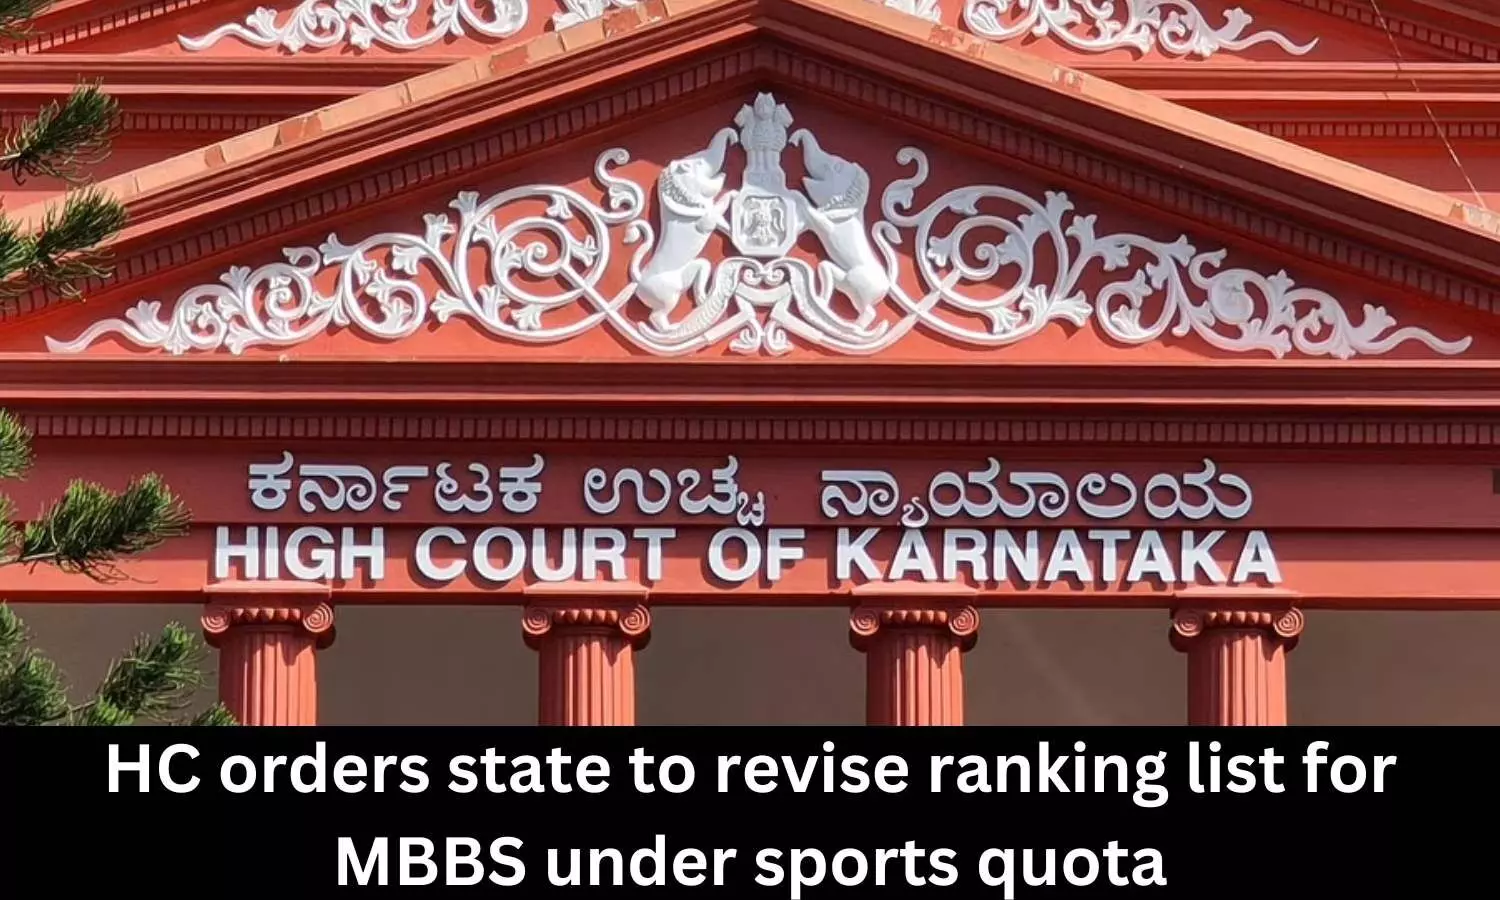 Karnataka HC orders state to revise ranking list for MBBS under sports quota